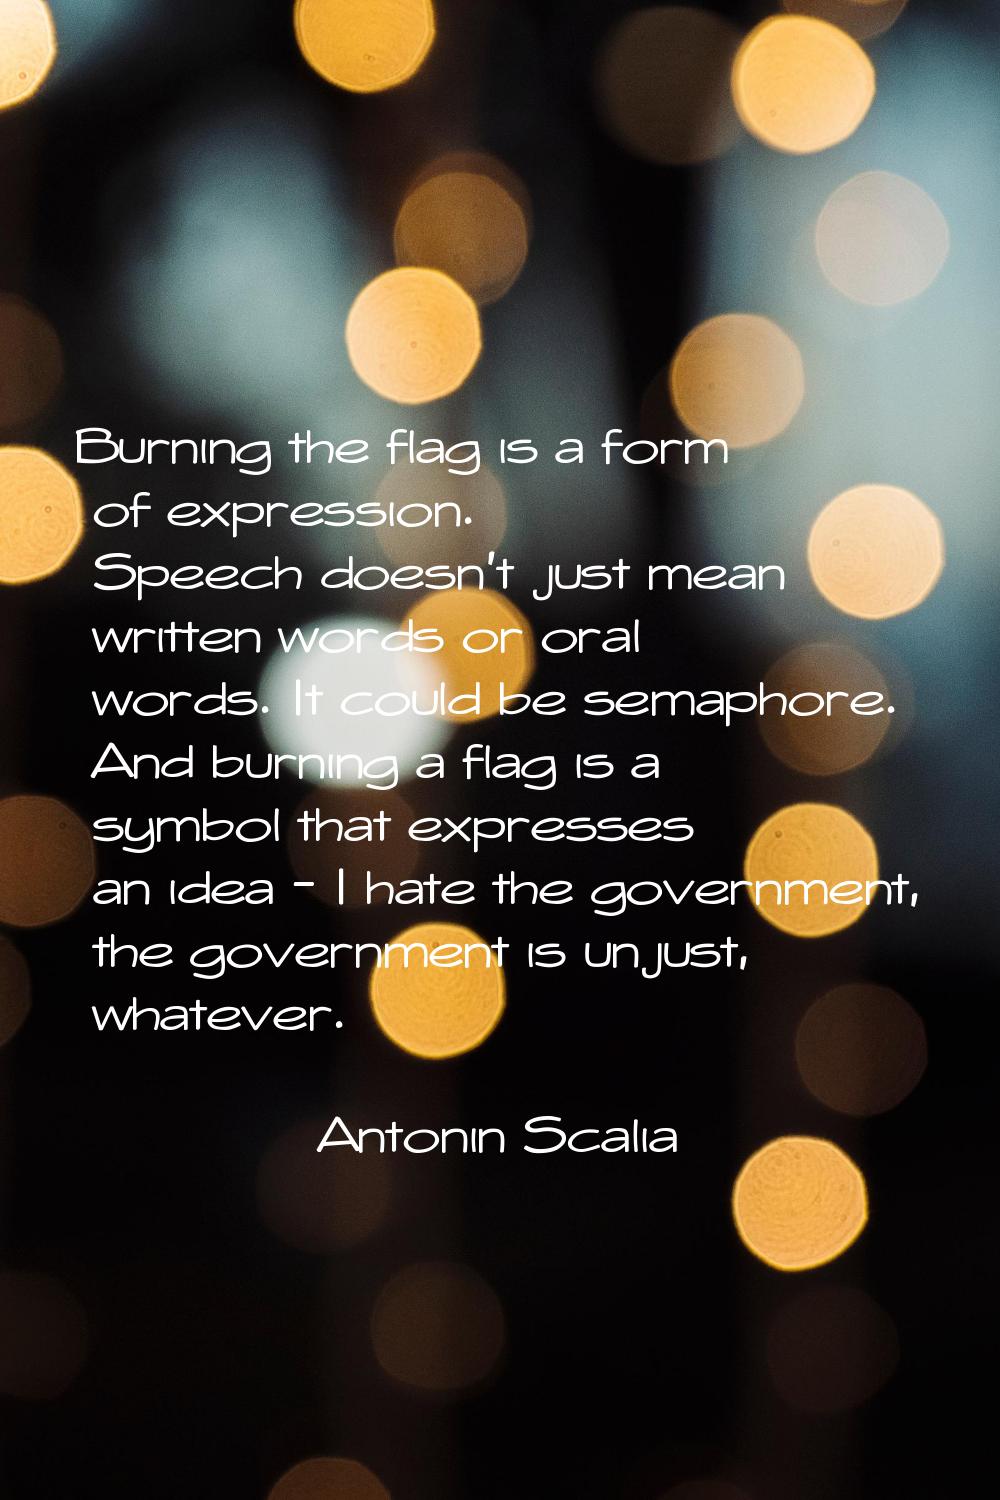 Burning the flag is a form of expression. Speech doesn't just mean written words or oral words. It 